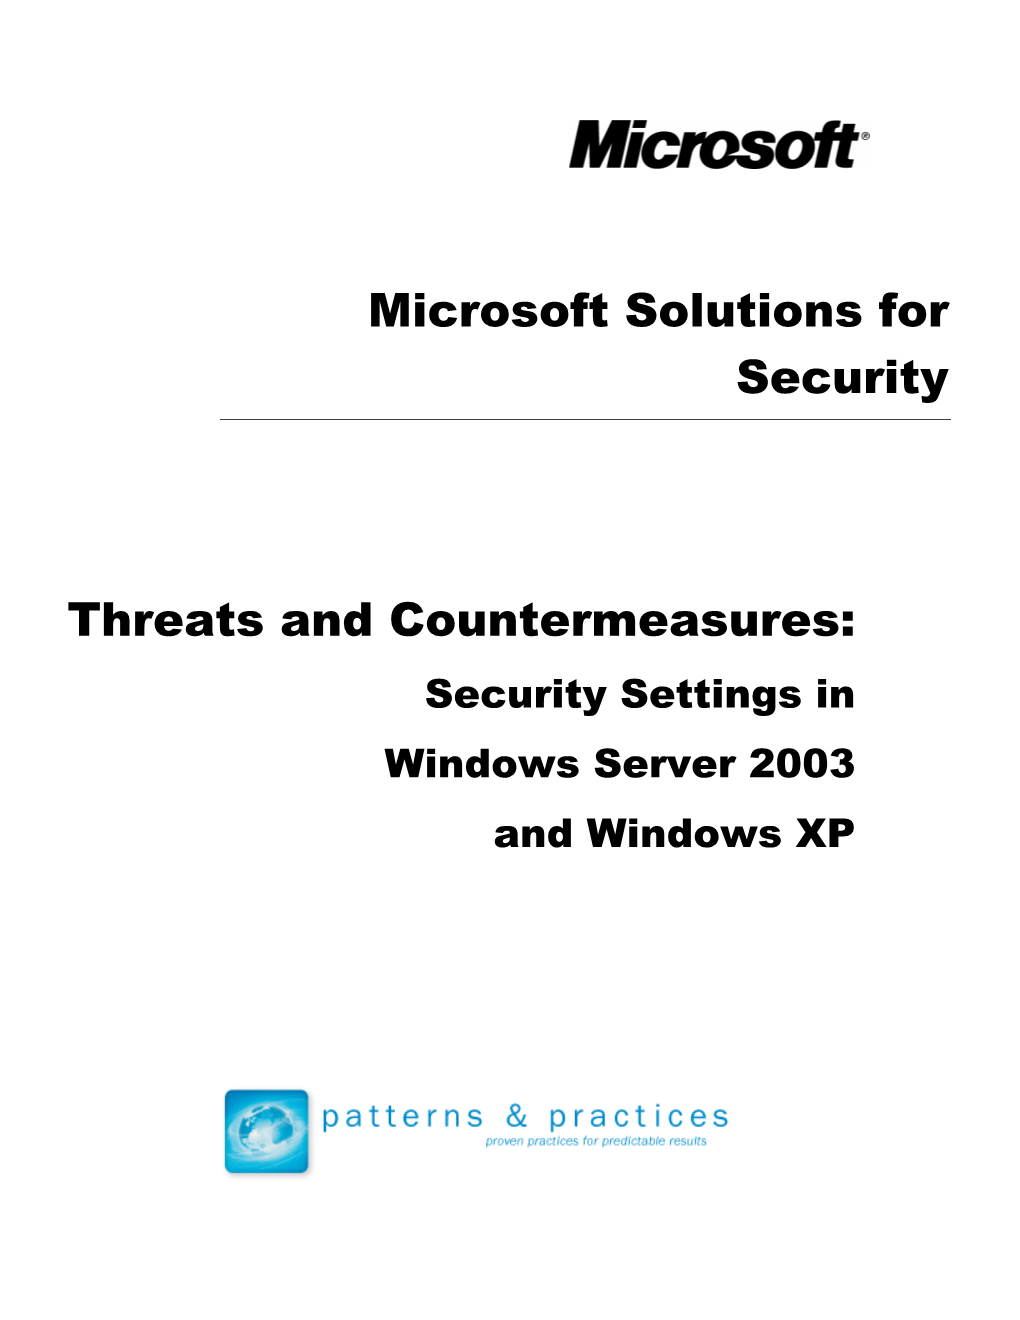 Threats and Countermeasures: Microsoft Solutions for Security